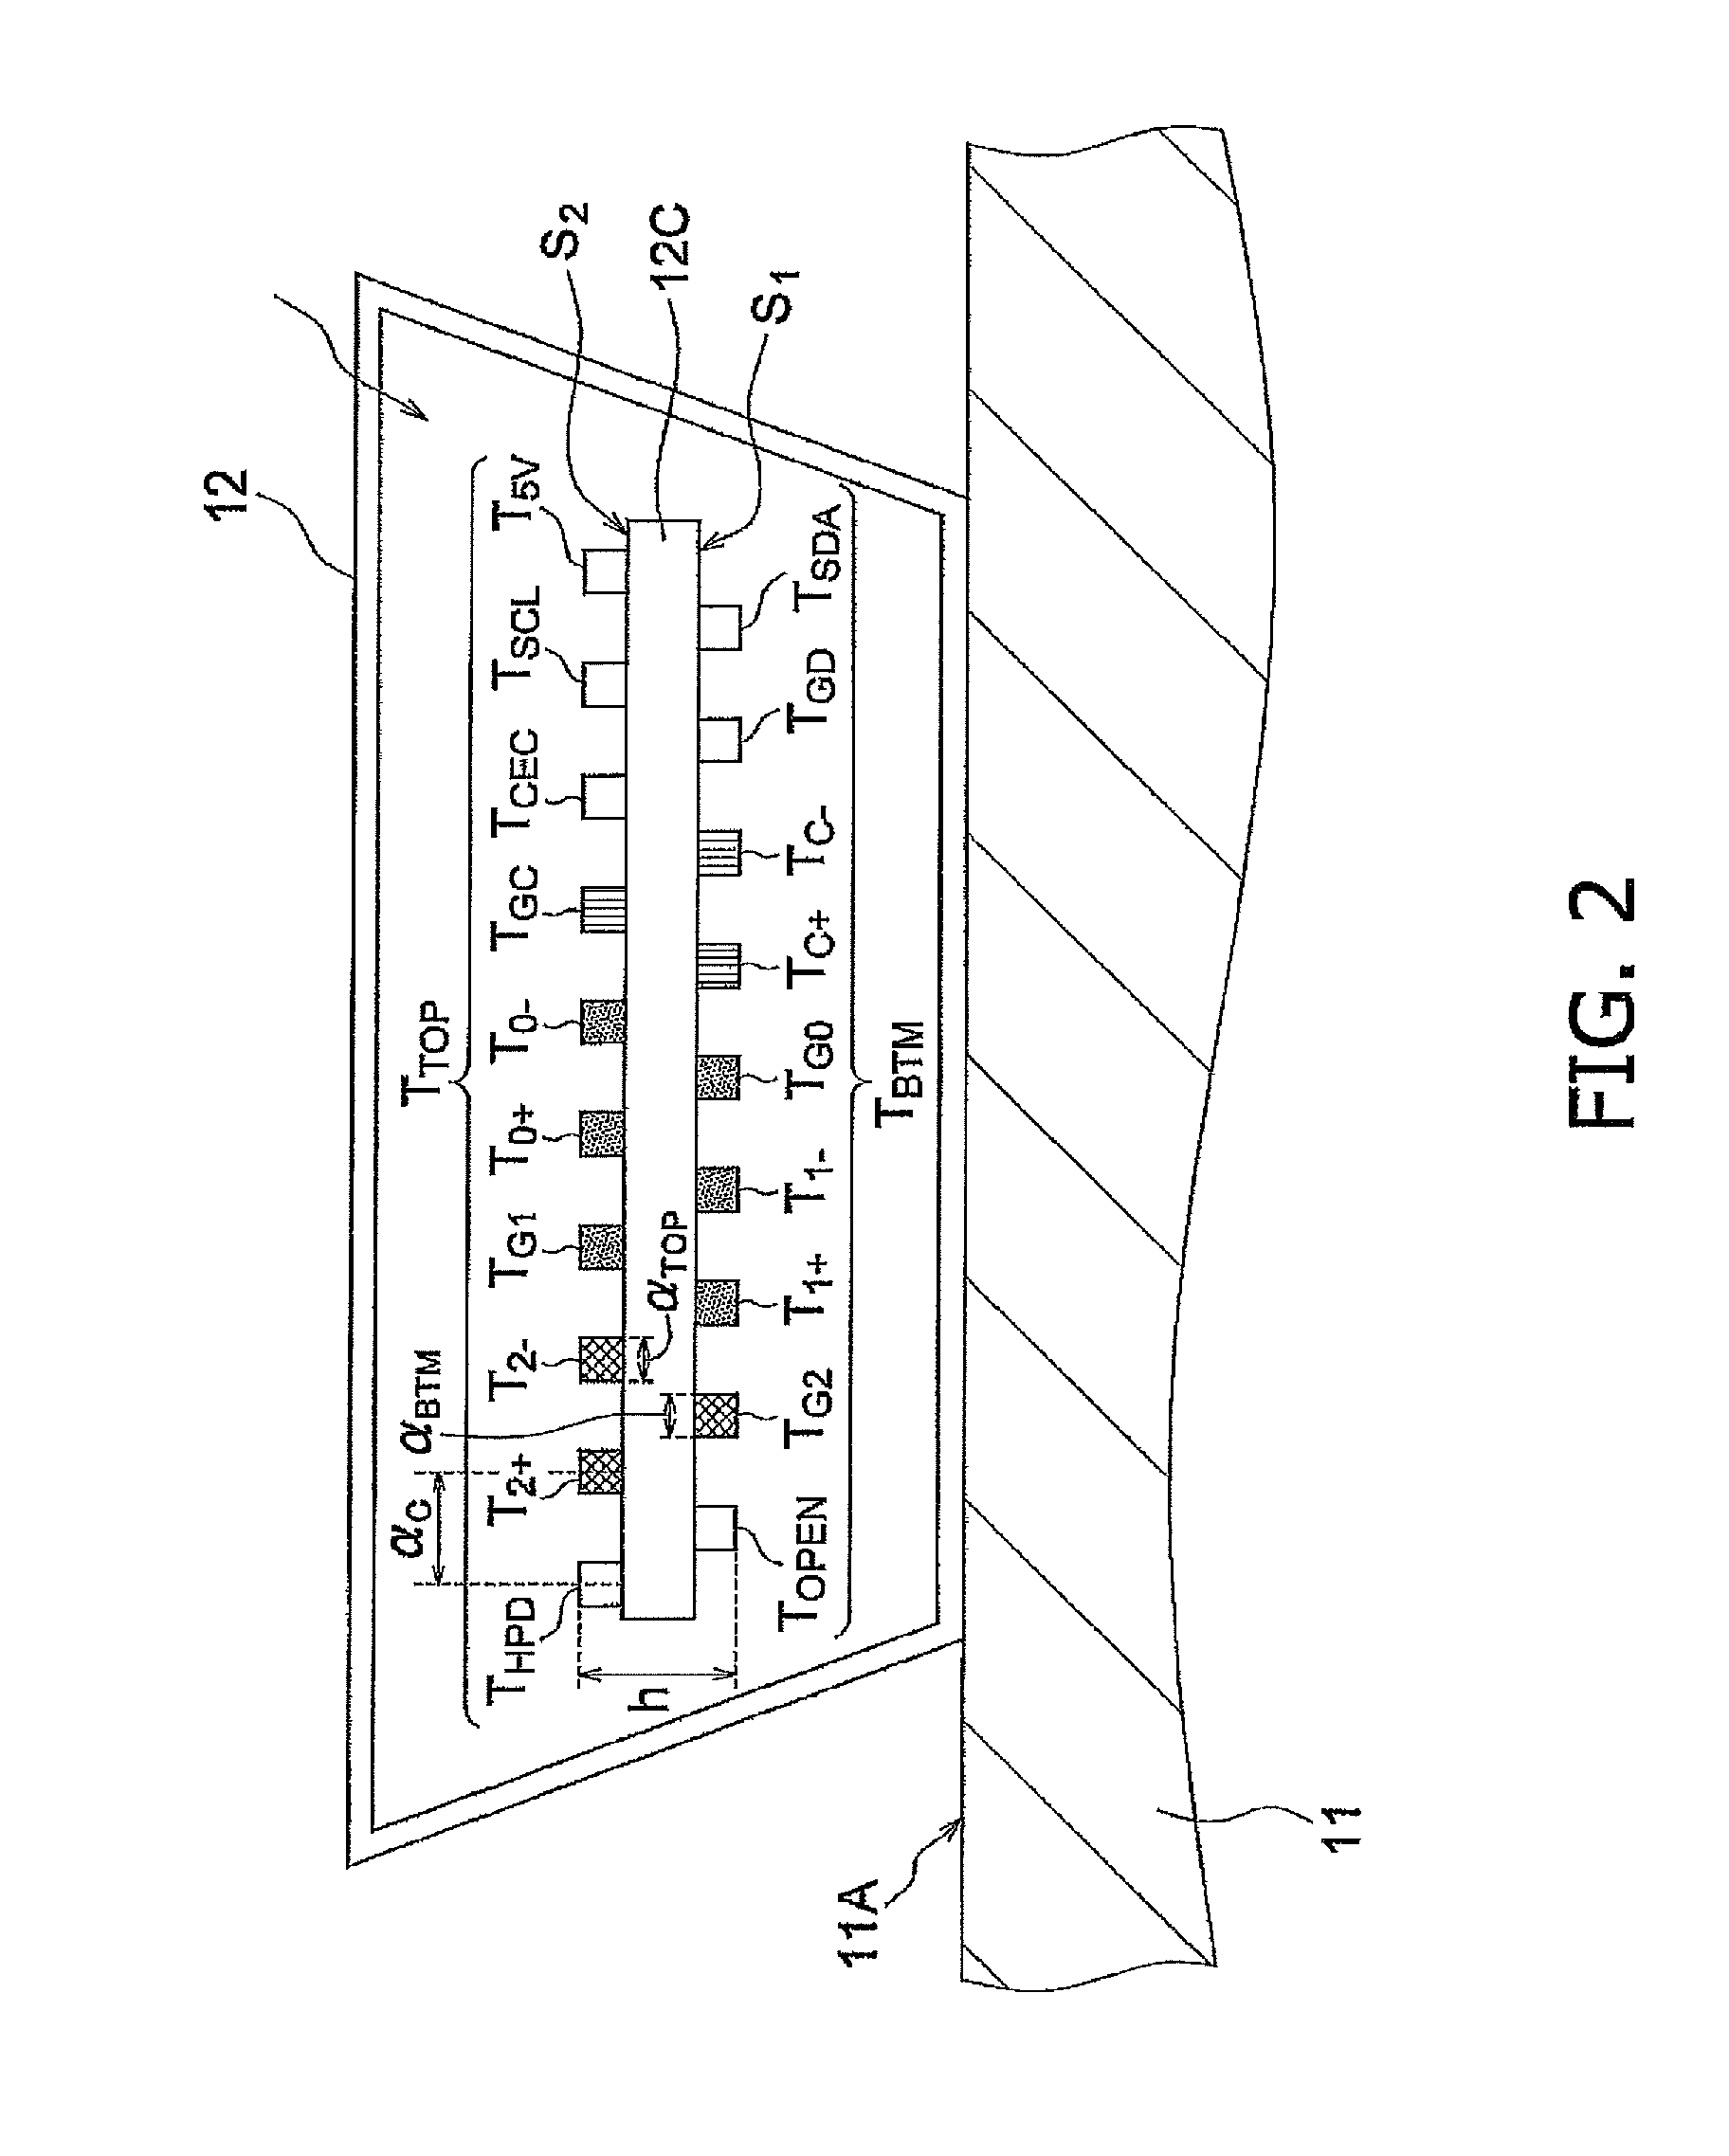 Connector assembly having signal and ground terminals